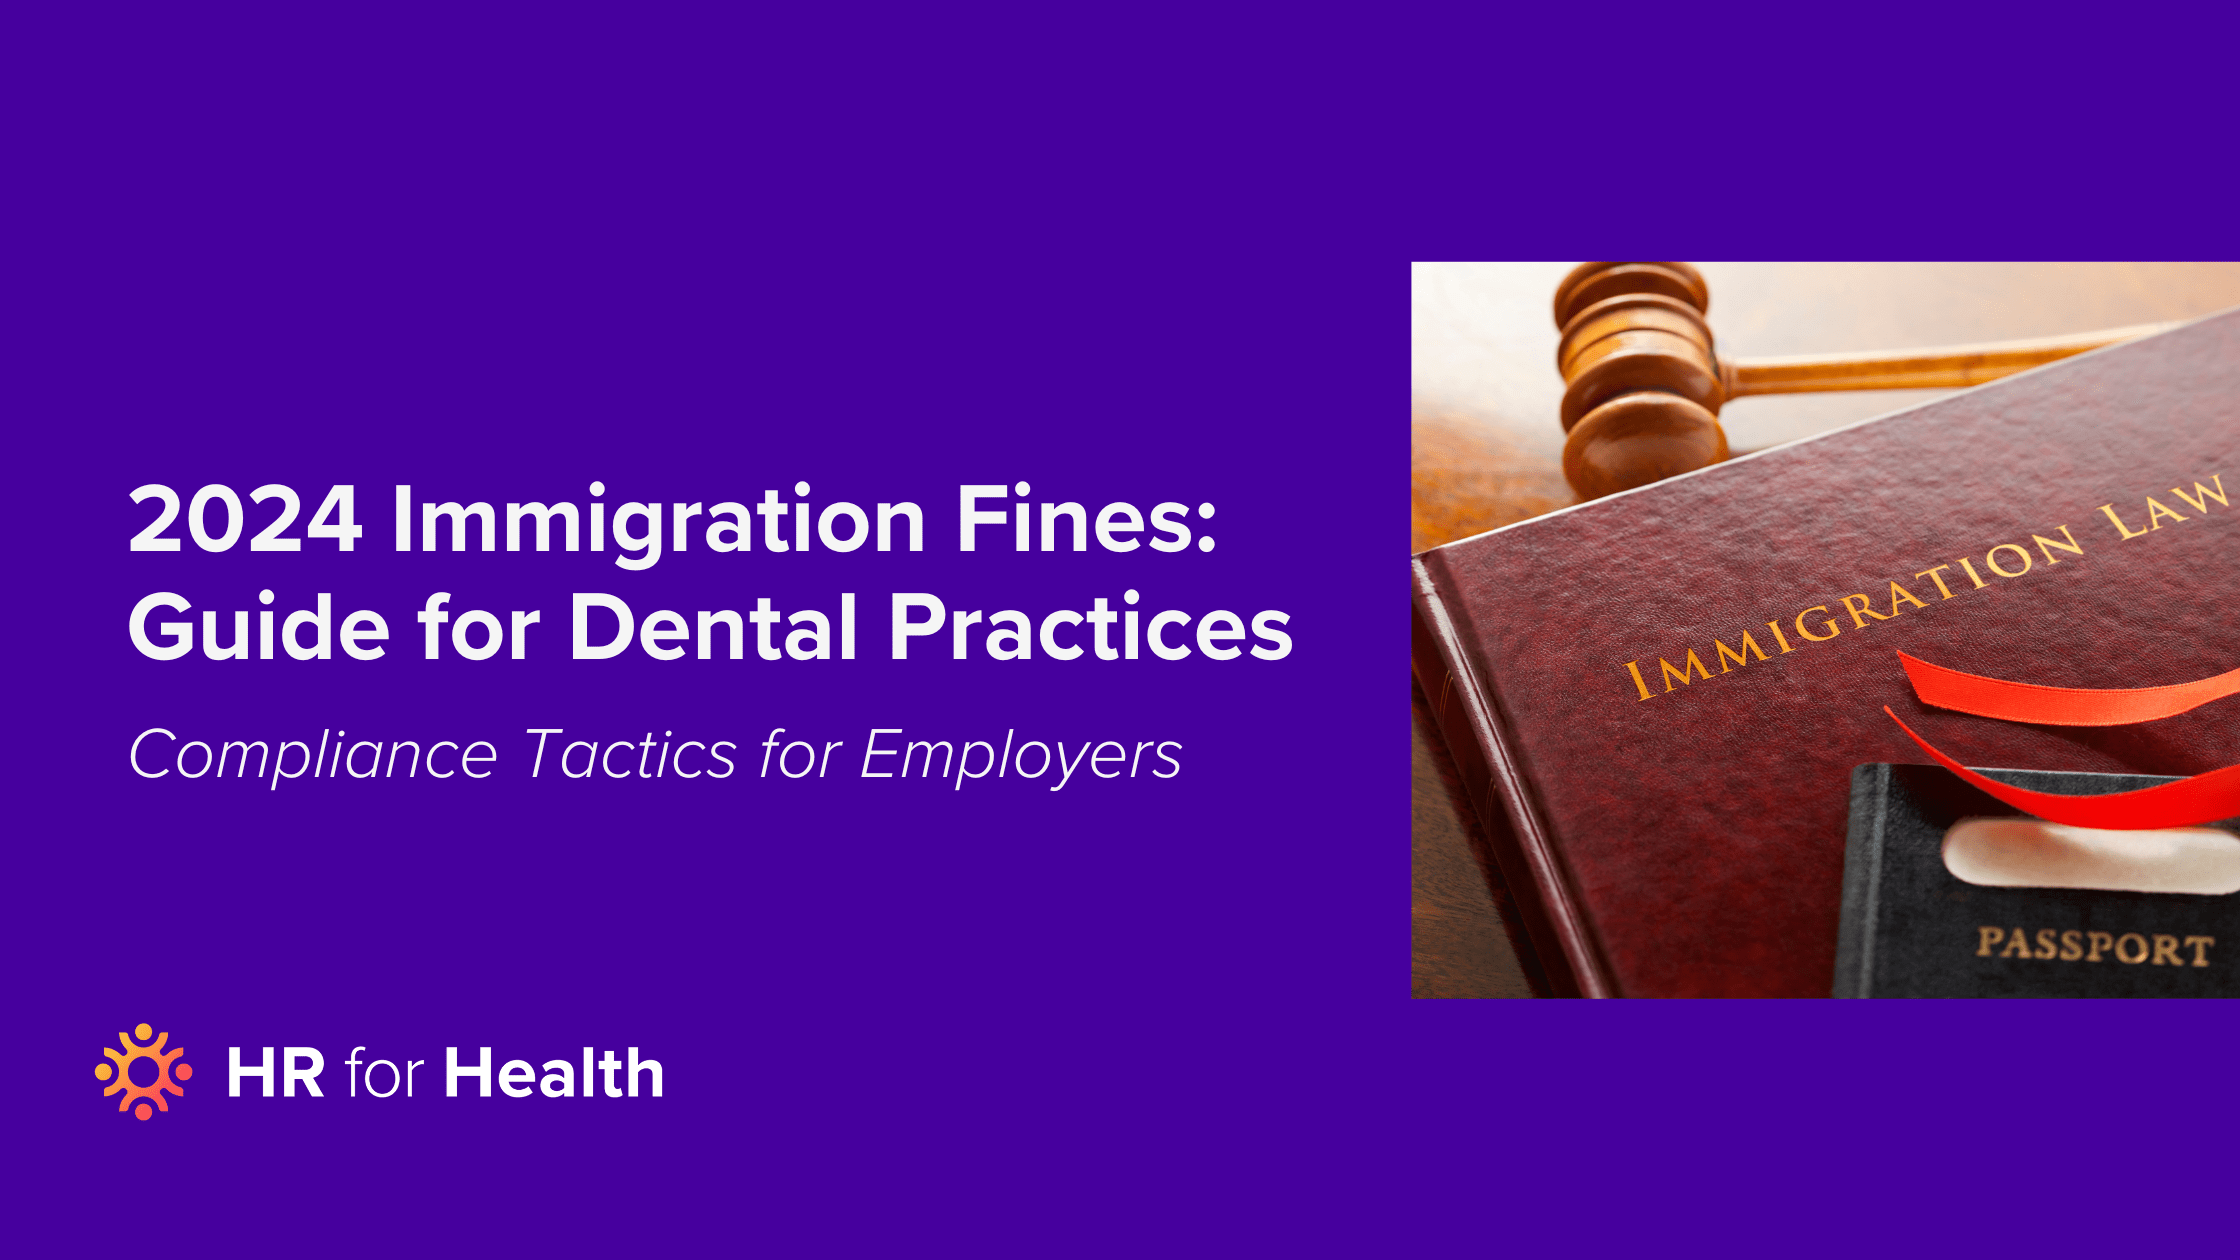 Preparing for Increased Penalties on Immigration Violations: A Guide for Dental Healthcare Employers